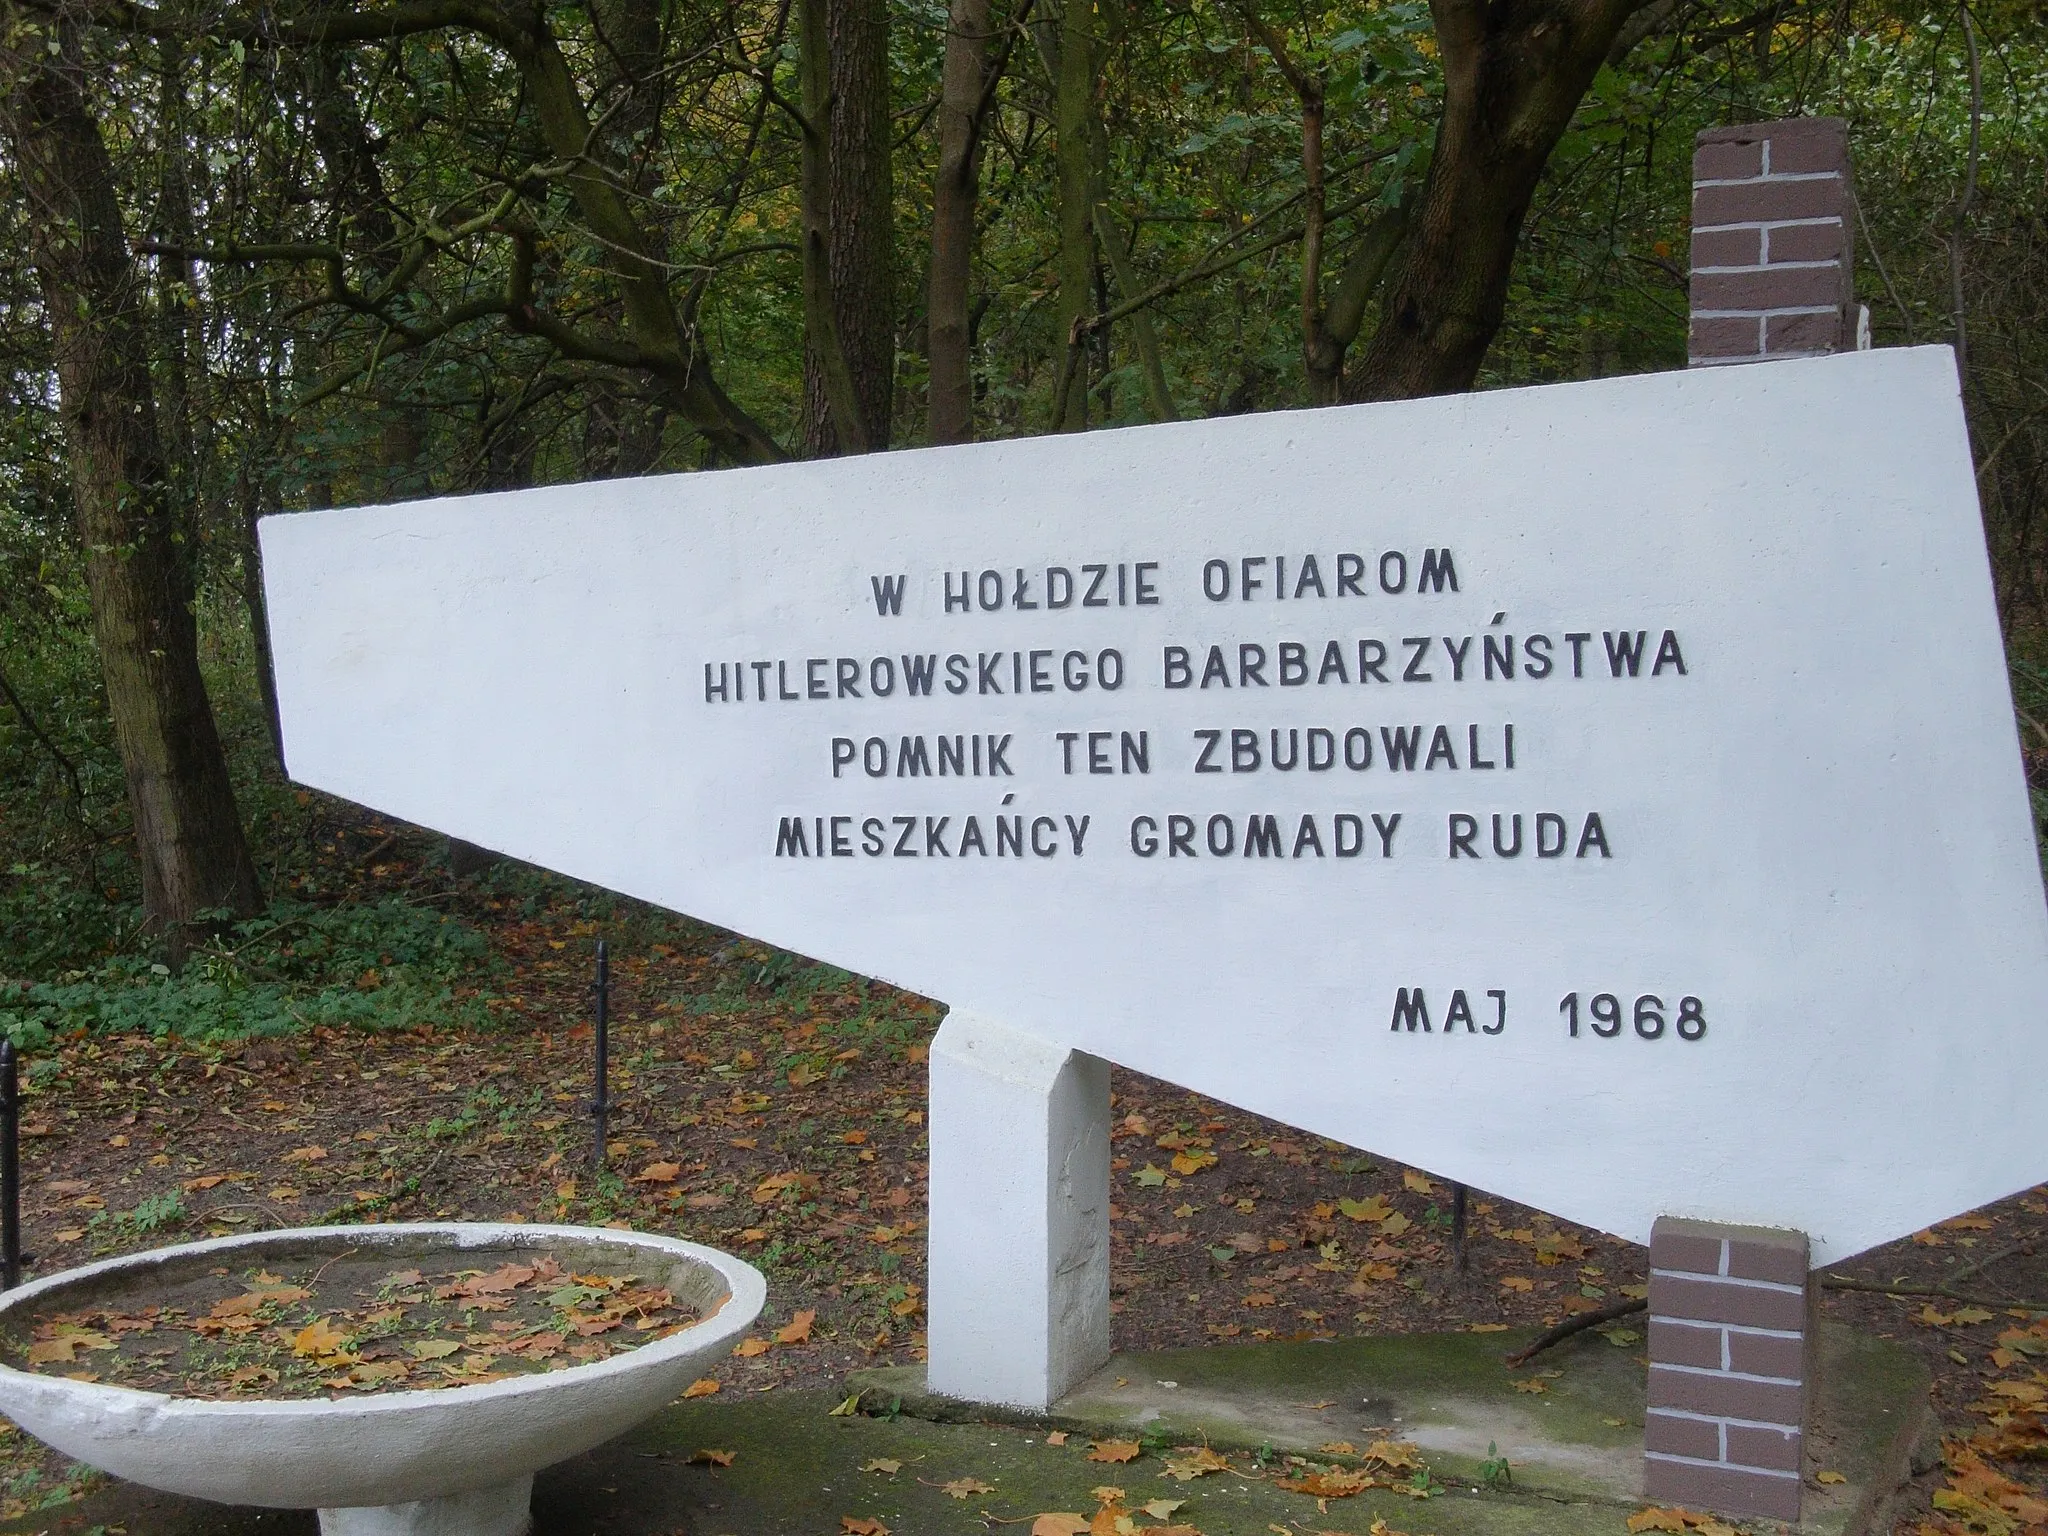 Photo showing: Monument on border of Ruda village. In memory of Nazi's victims